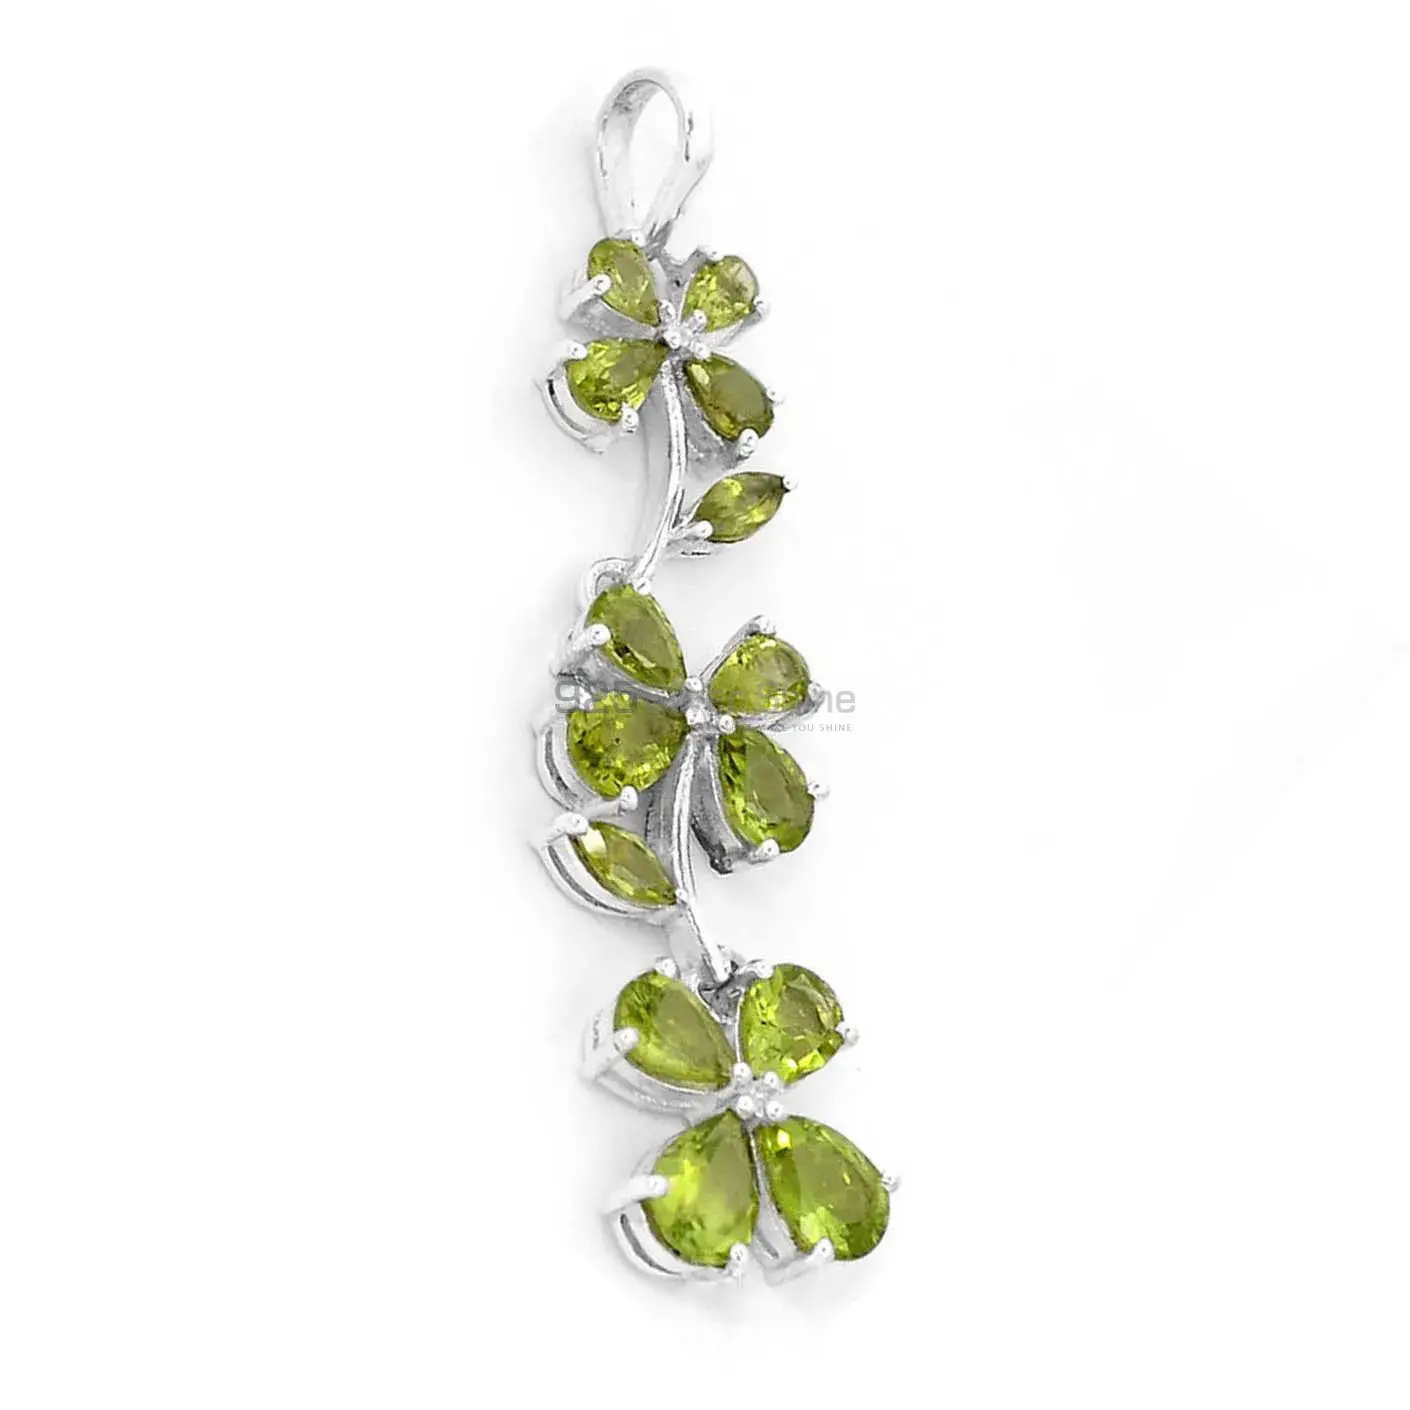 Peridot Gemstone Top Quality Pendants In Solid Sterling Silver Jewelry 925SSP329-2_1